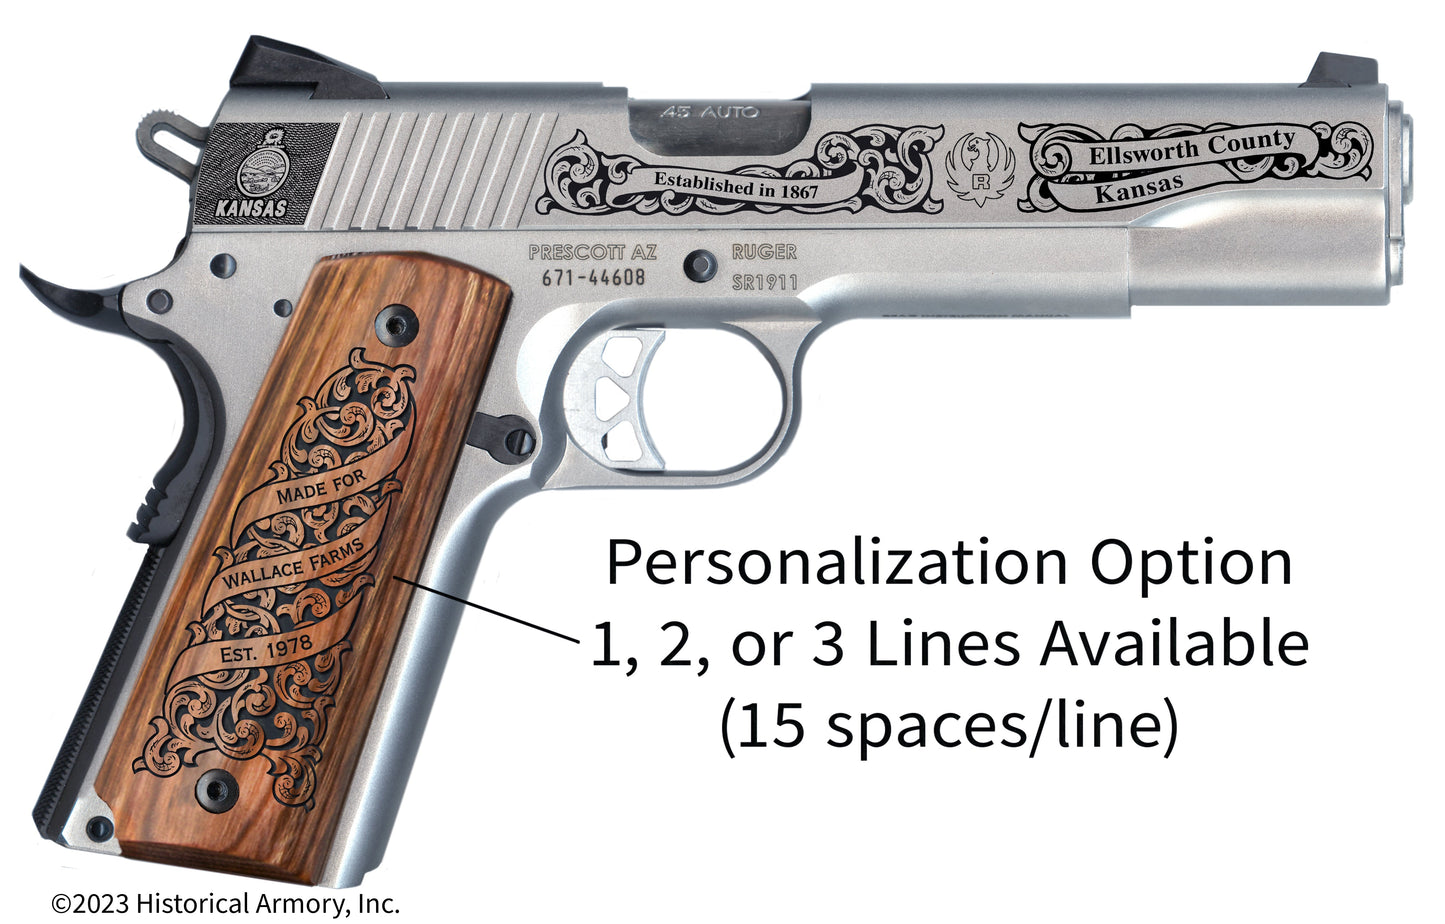 Ellsworth County Kansas Personalized Engraved .45 Auto Ruger 1911